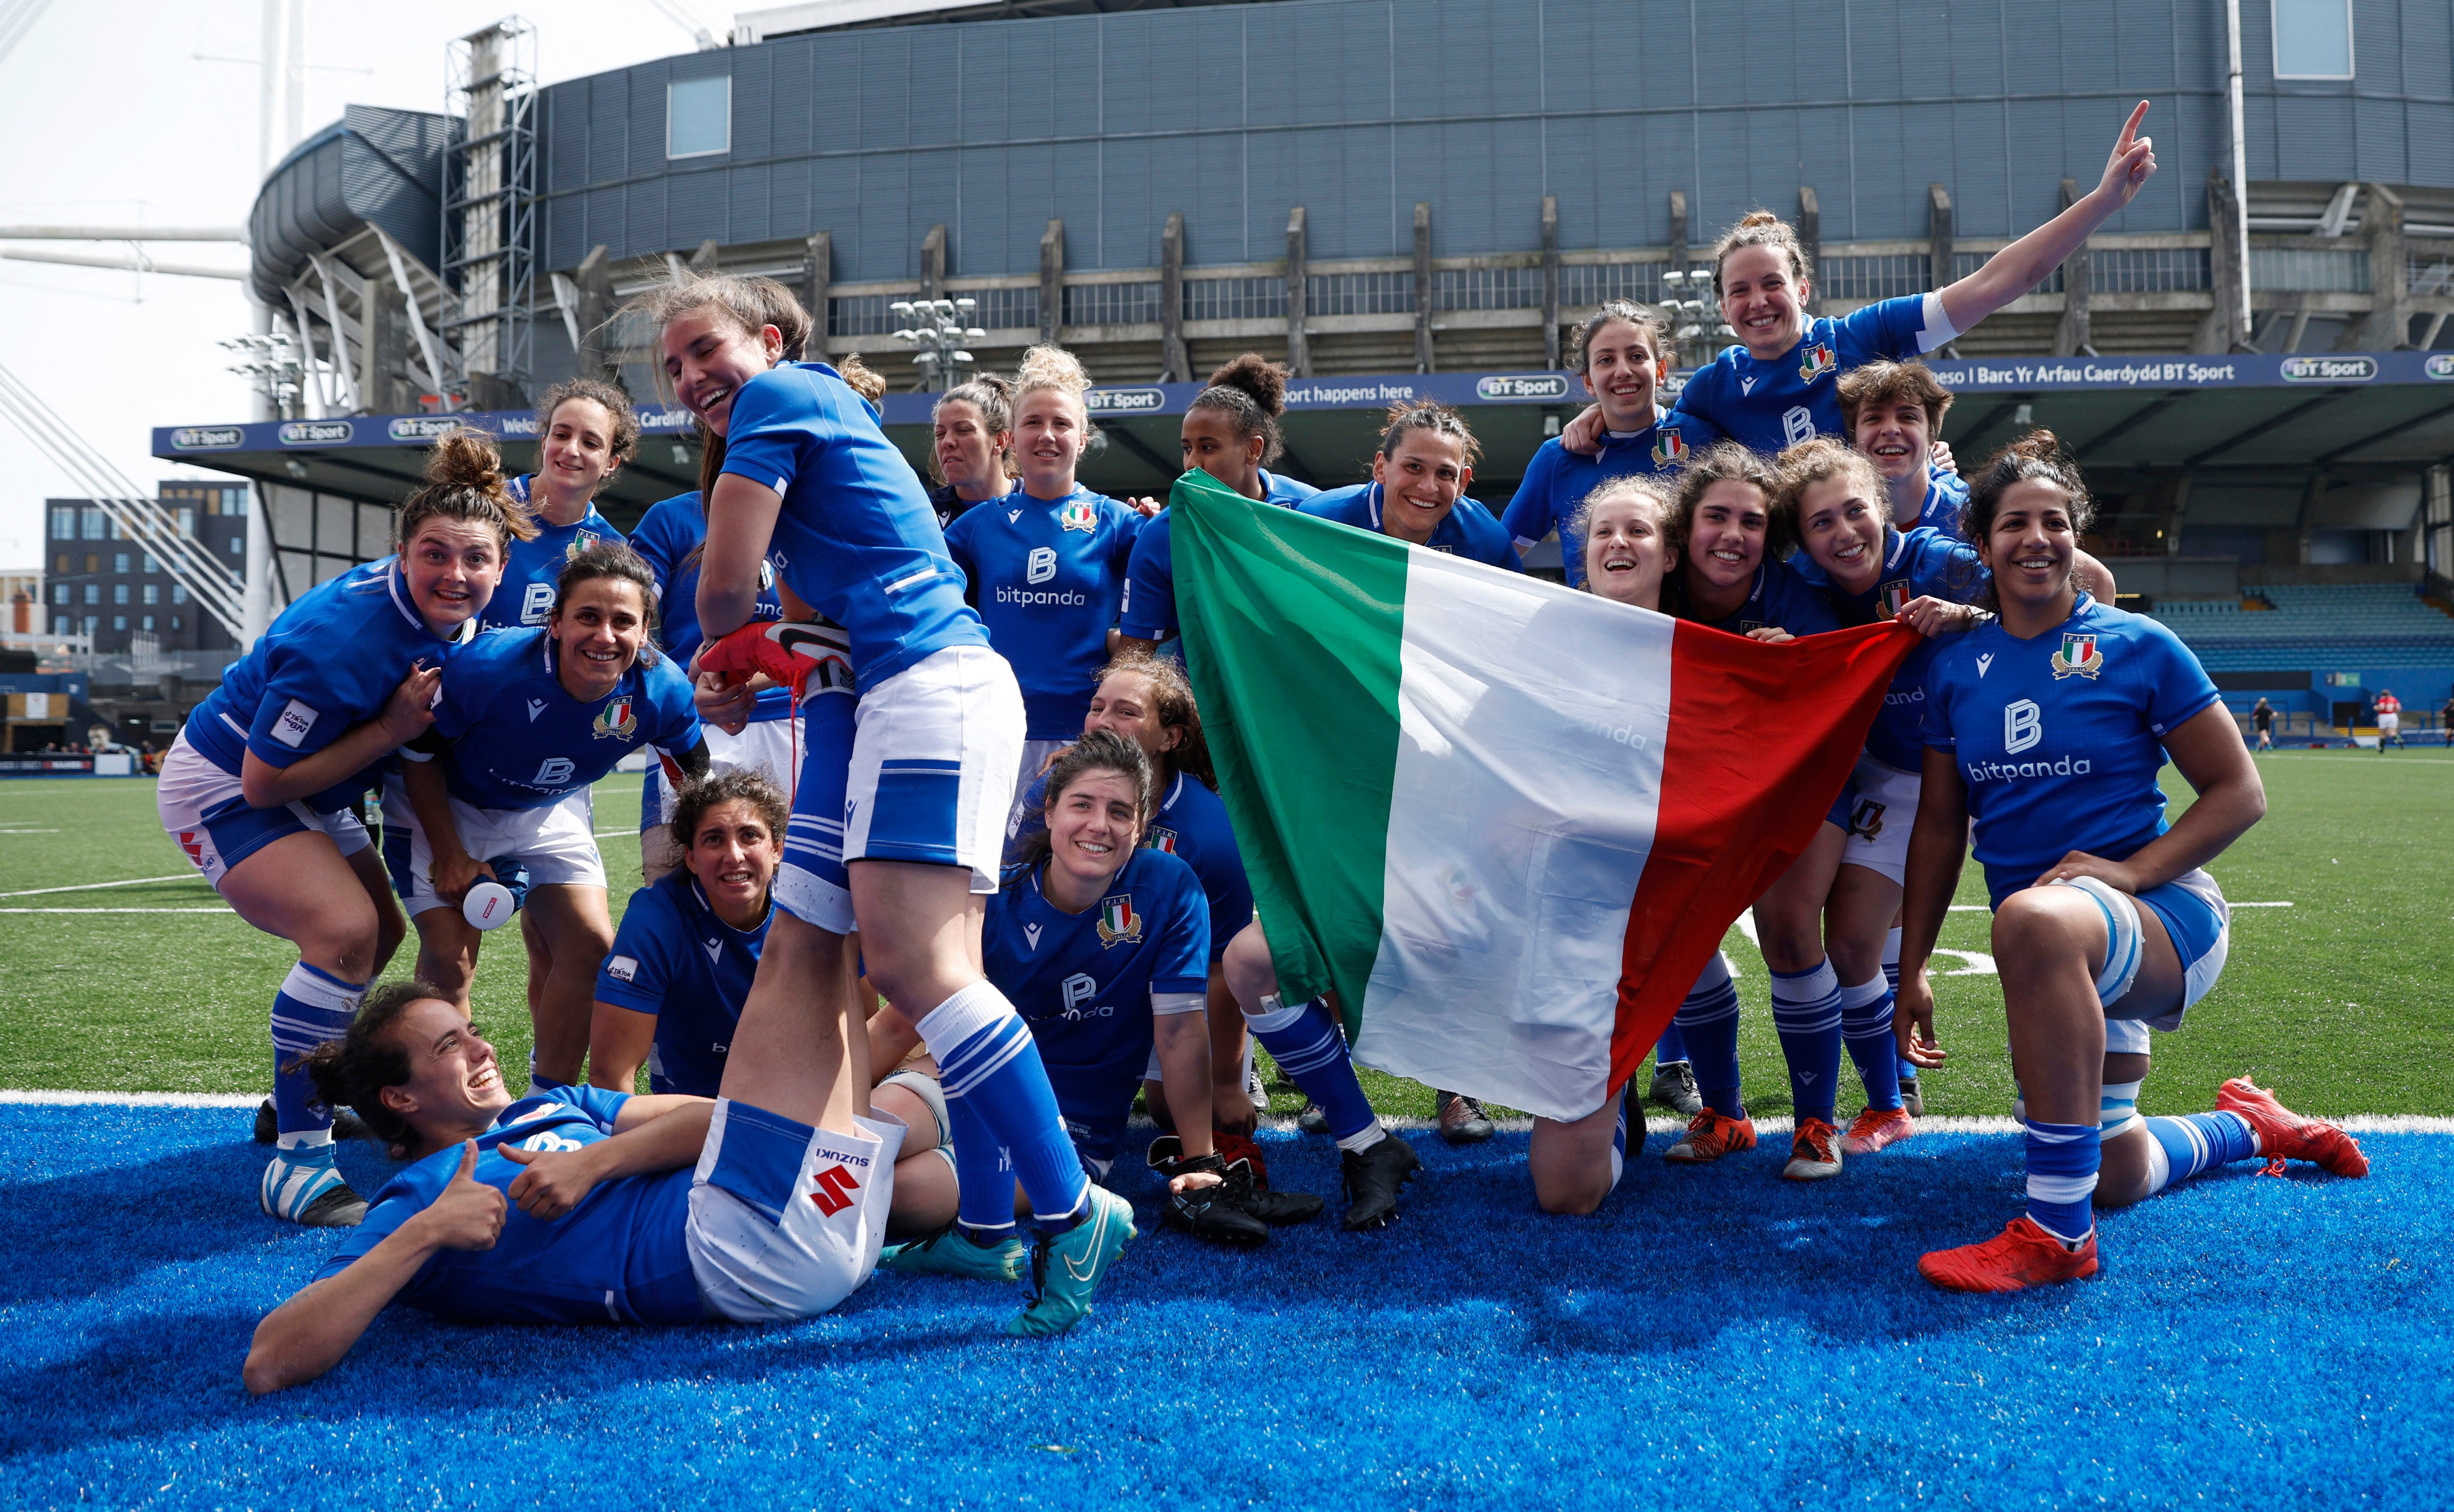 Italy celebrated after winning their second game of this year’s Women’s Six Nations